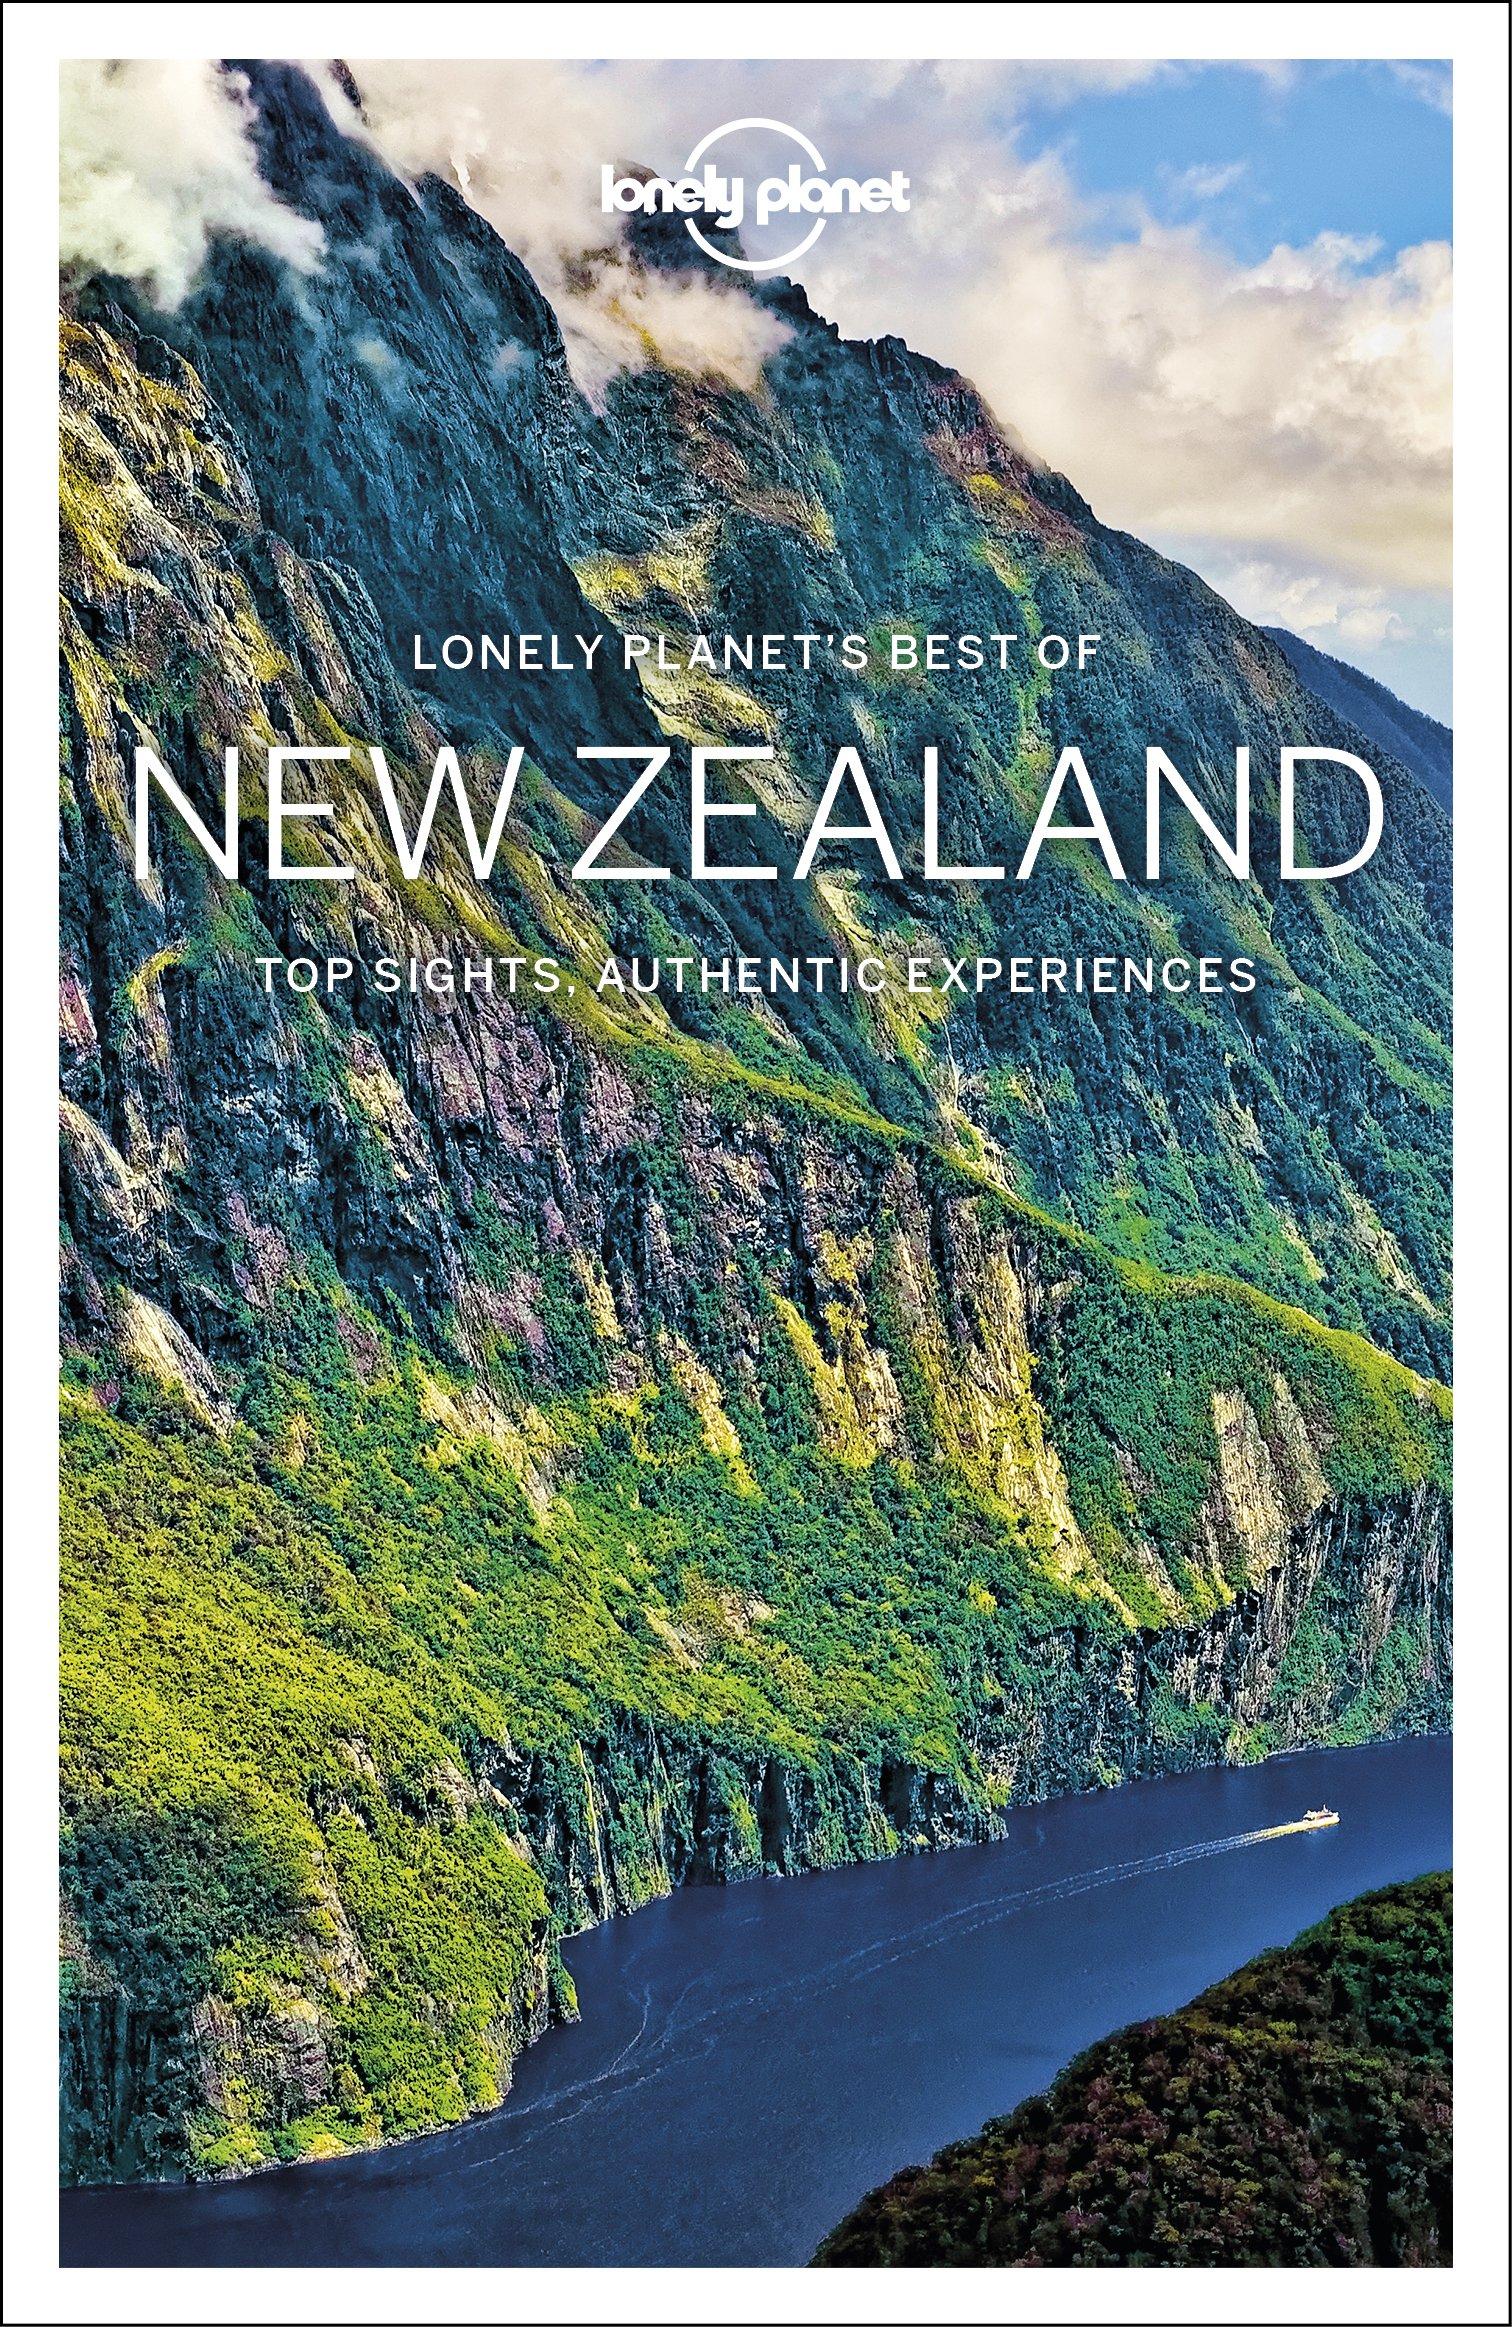 Lonely Planet: Best of New Zealand